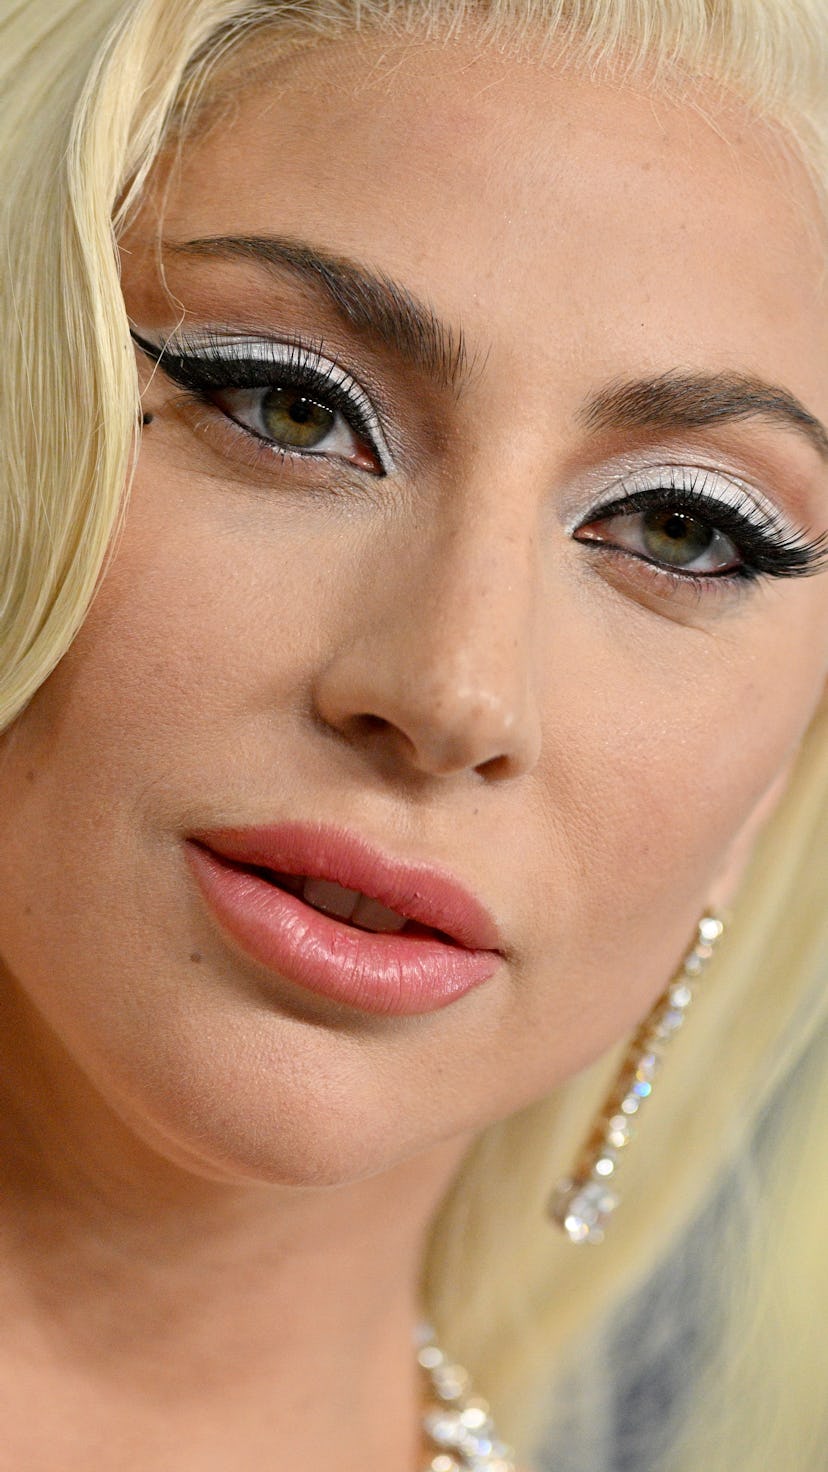 At the SAG Awards 2022, Lady Gaga had one of the best makeup looks on the red carpet.